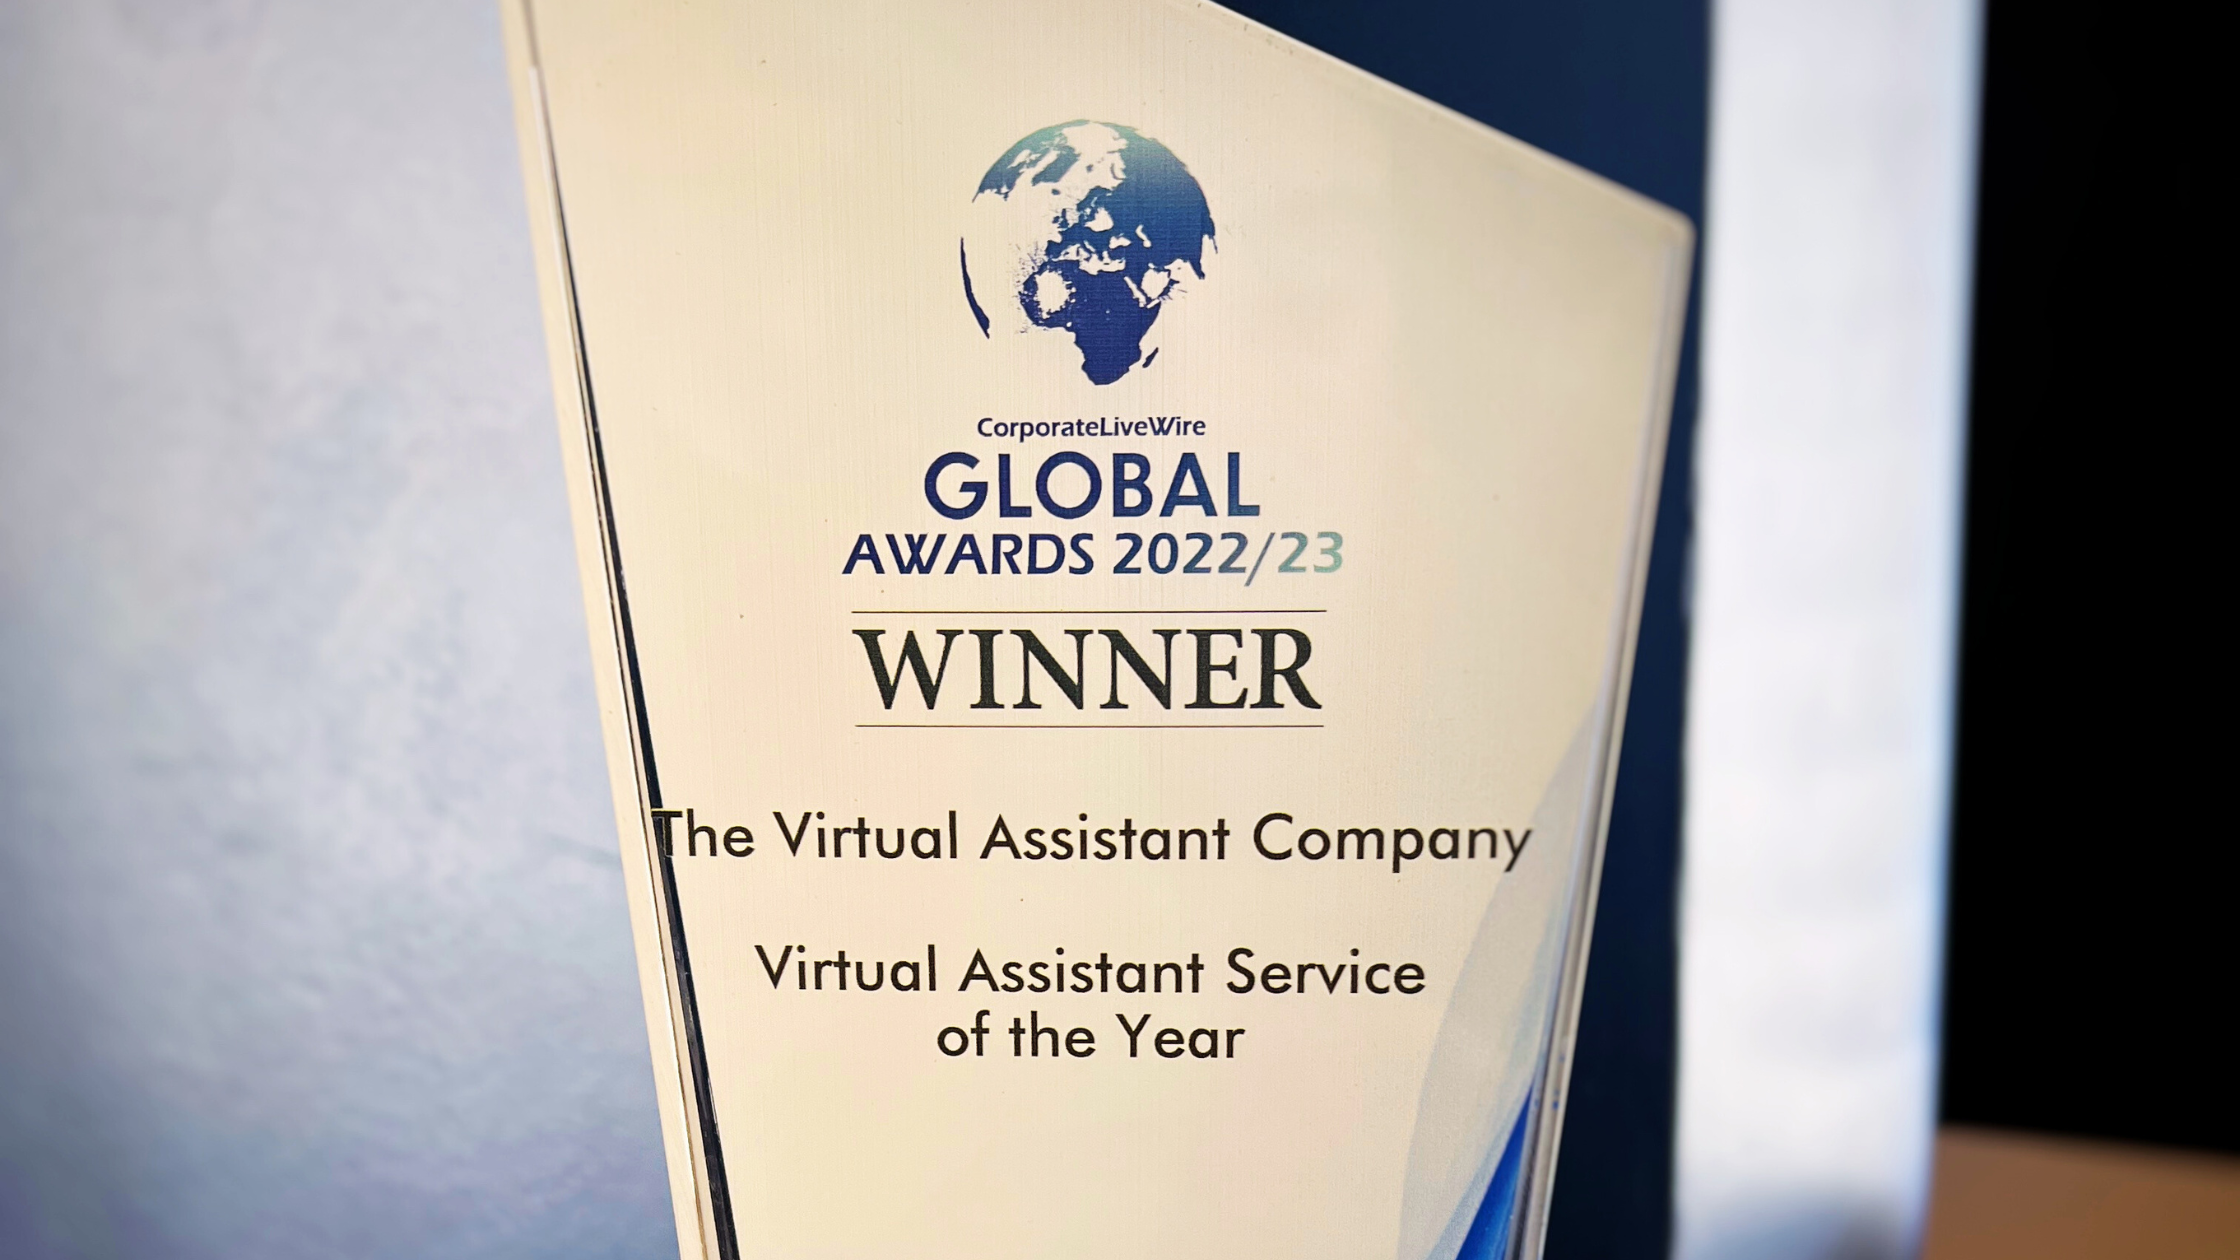 Plymouth-based business brings home trophy from global business awards